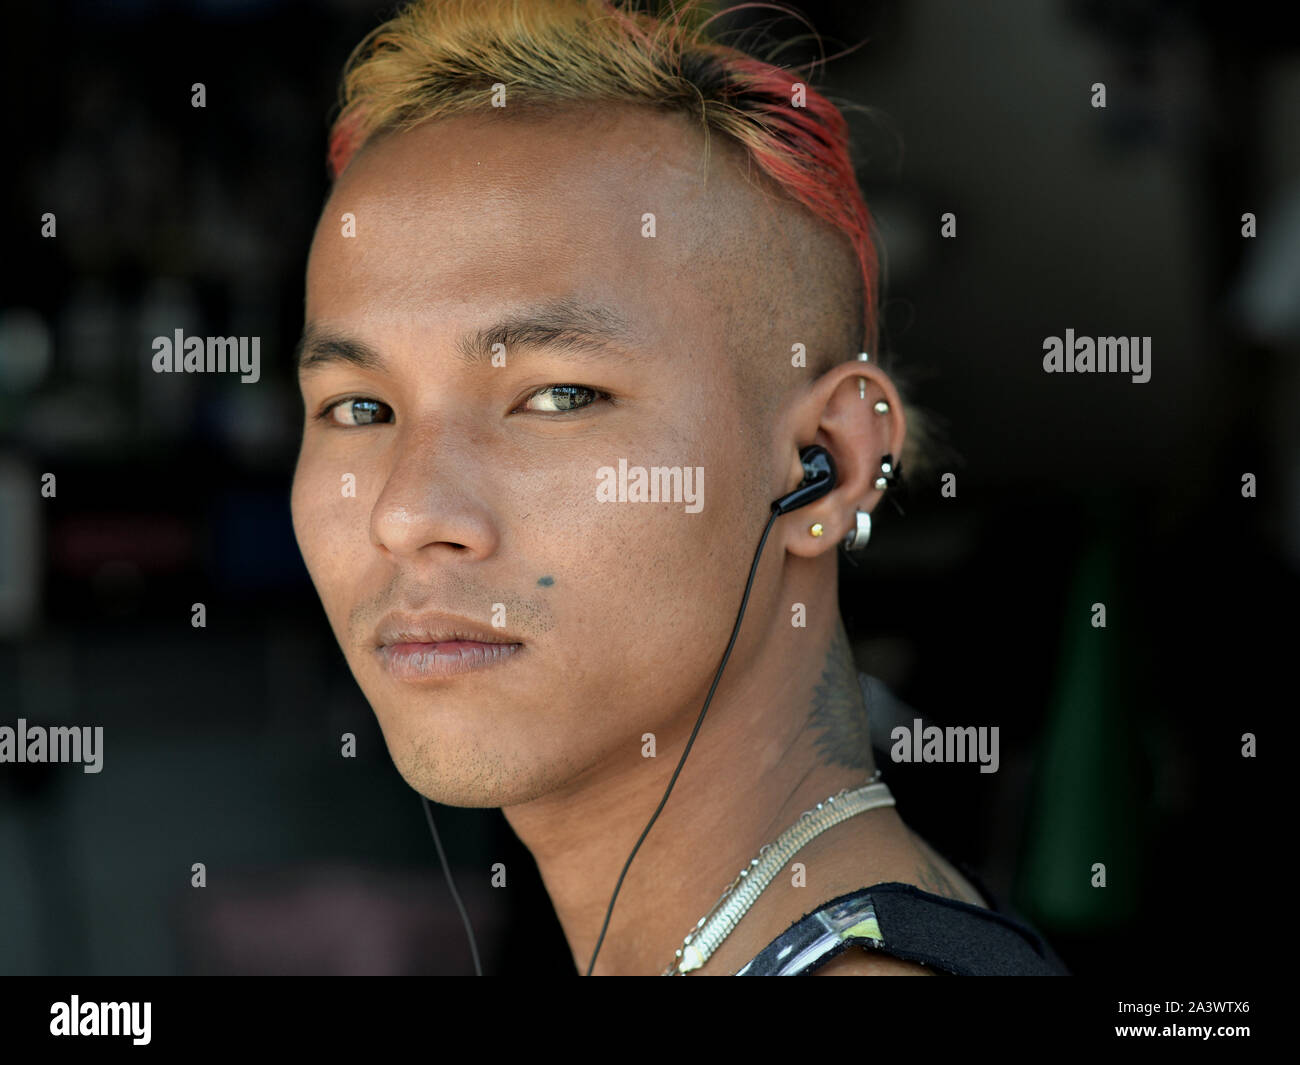 Cool looking, young Burmese man with earphones, dyed hair and stylish hair cut poses for the camera. Stock Photo